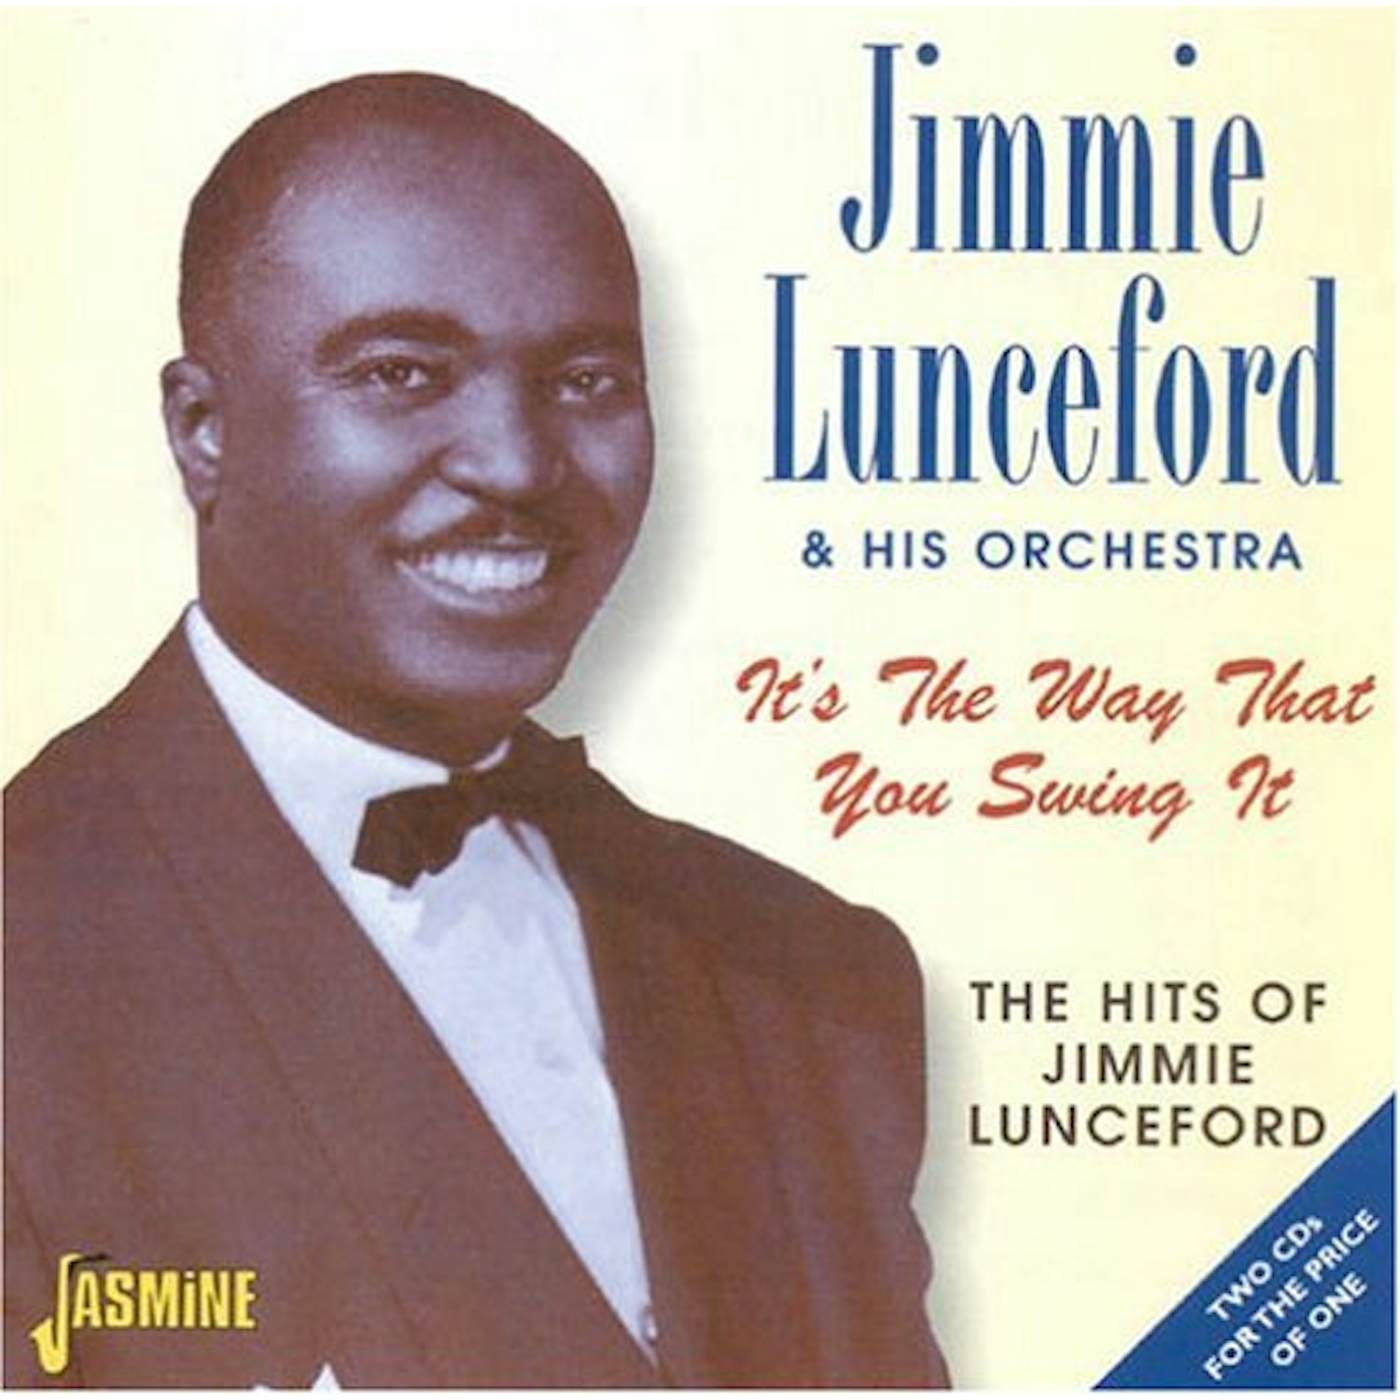 Jimmie Lunceford & His Orchestra IT'S THE WAY THAT YOU SWING IT: HITS OF JIMMIE CD